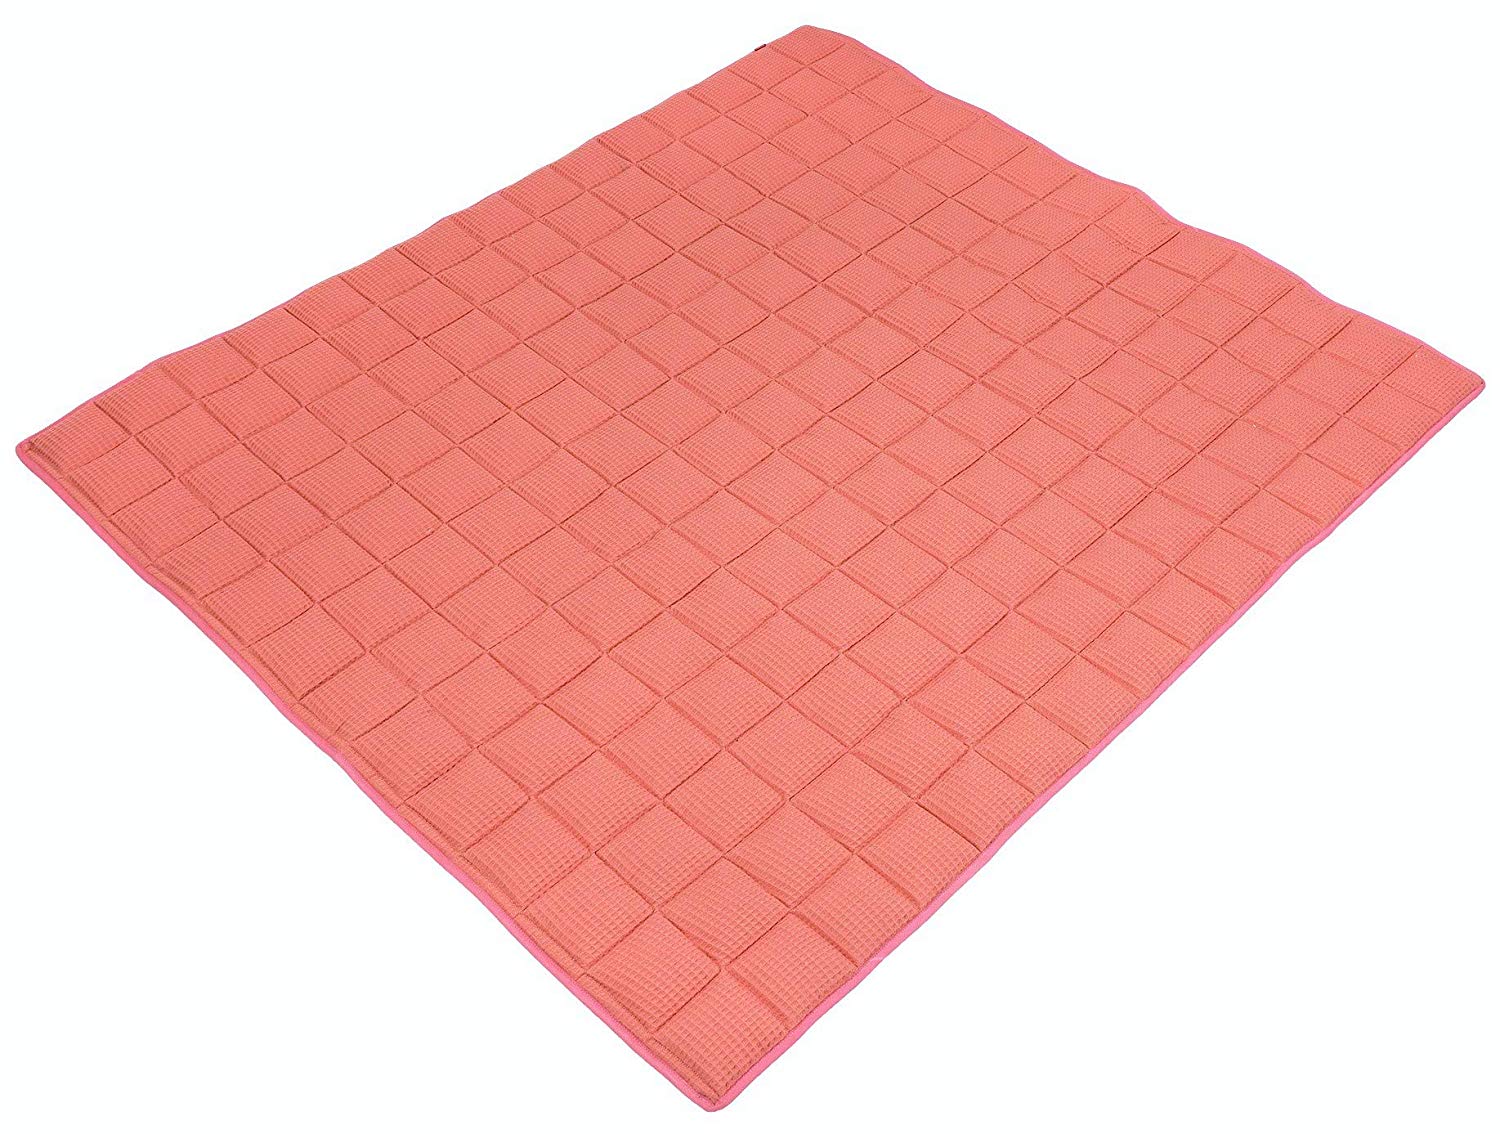 Ideenreich Ideenreich 2545 Baby Crawling Blanket for Crawling Dream Waffle Look Salmon 130 x 150 cm Ideal as Play Mat and Playpen Mat Orange